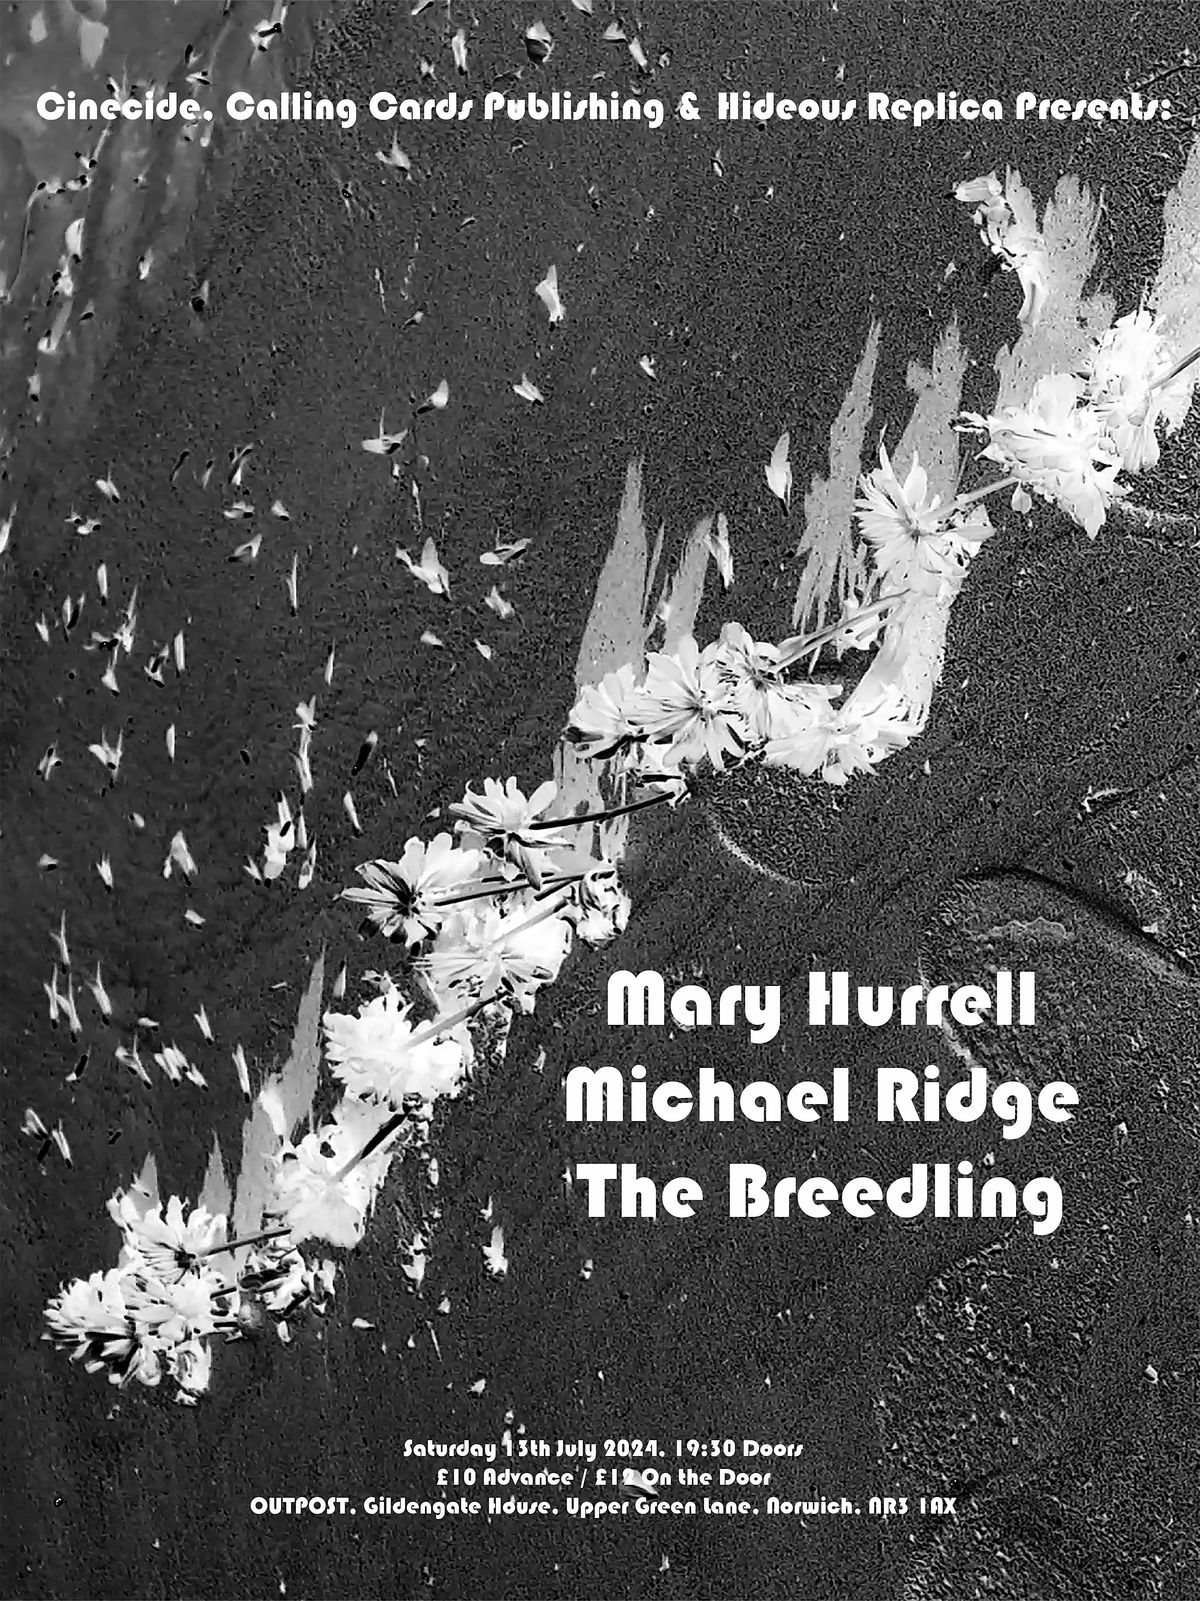 Cinecide, CCP & Hideous Replica Presents: Mary Hurrell, Michael Ridge and The Breedling